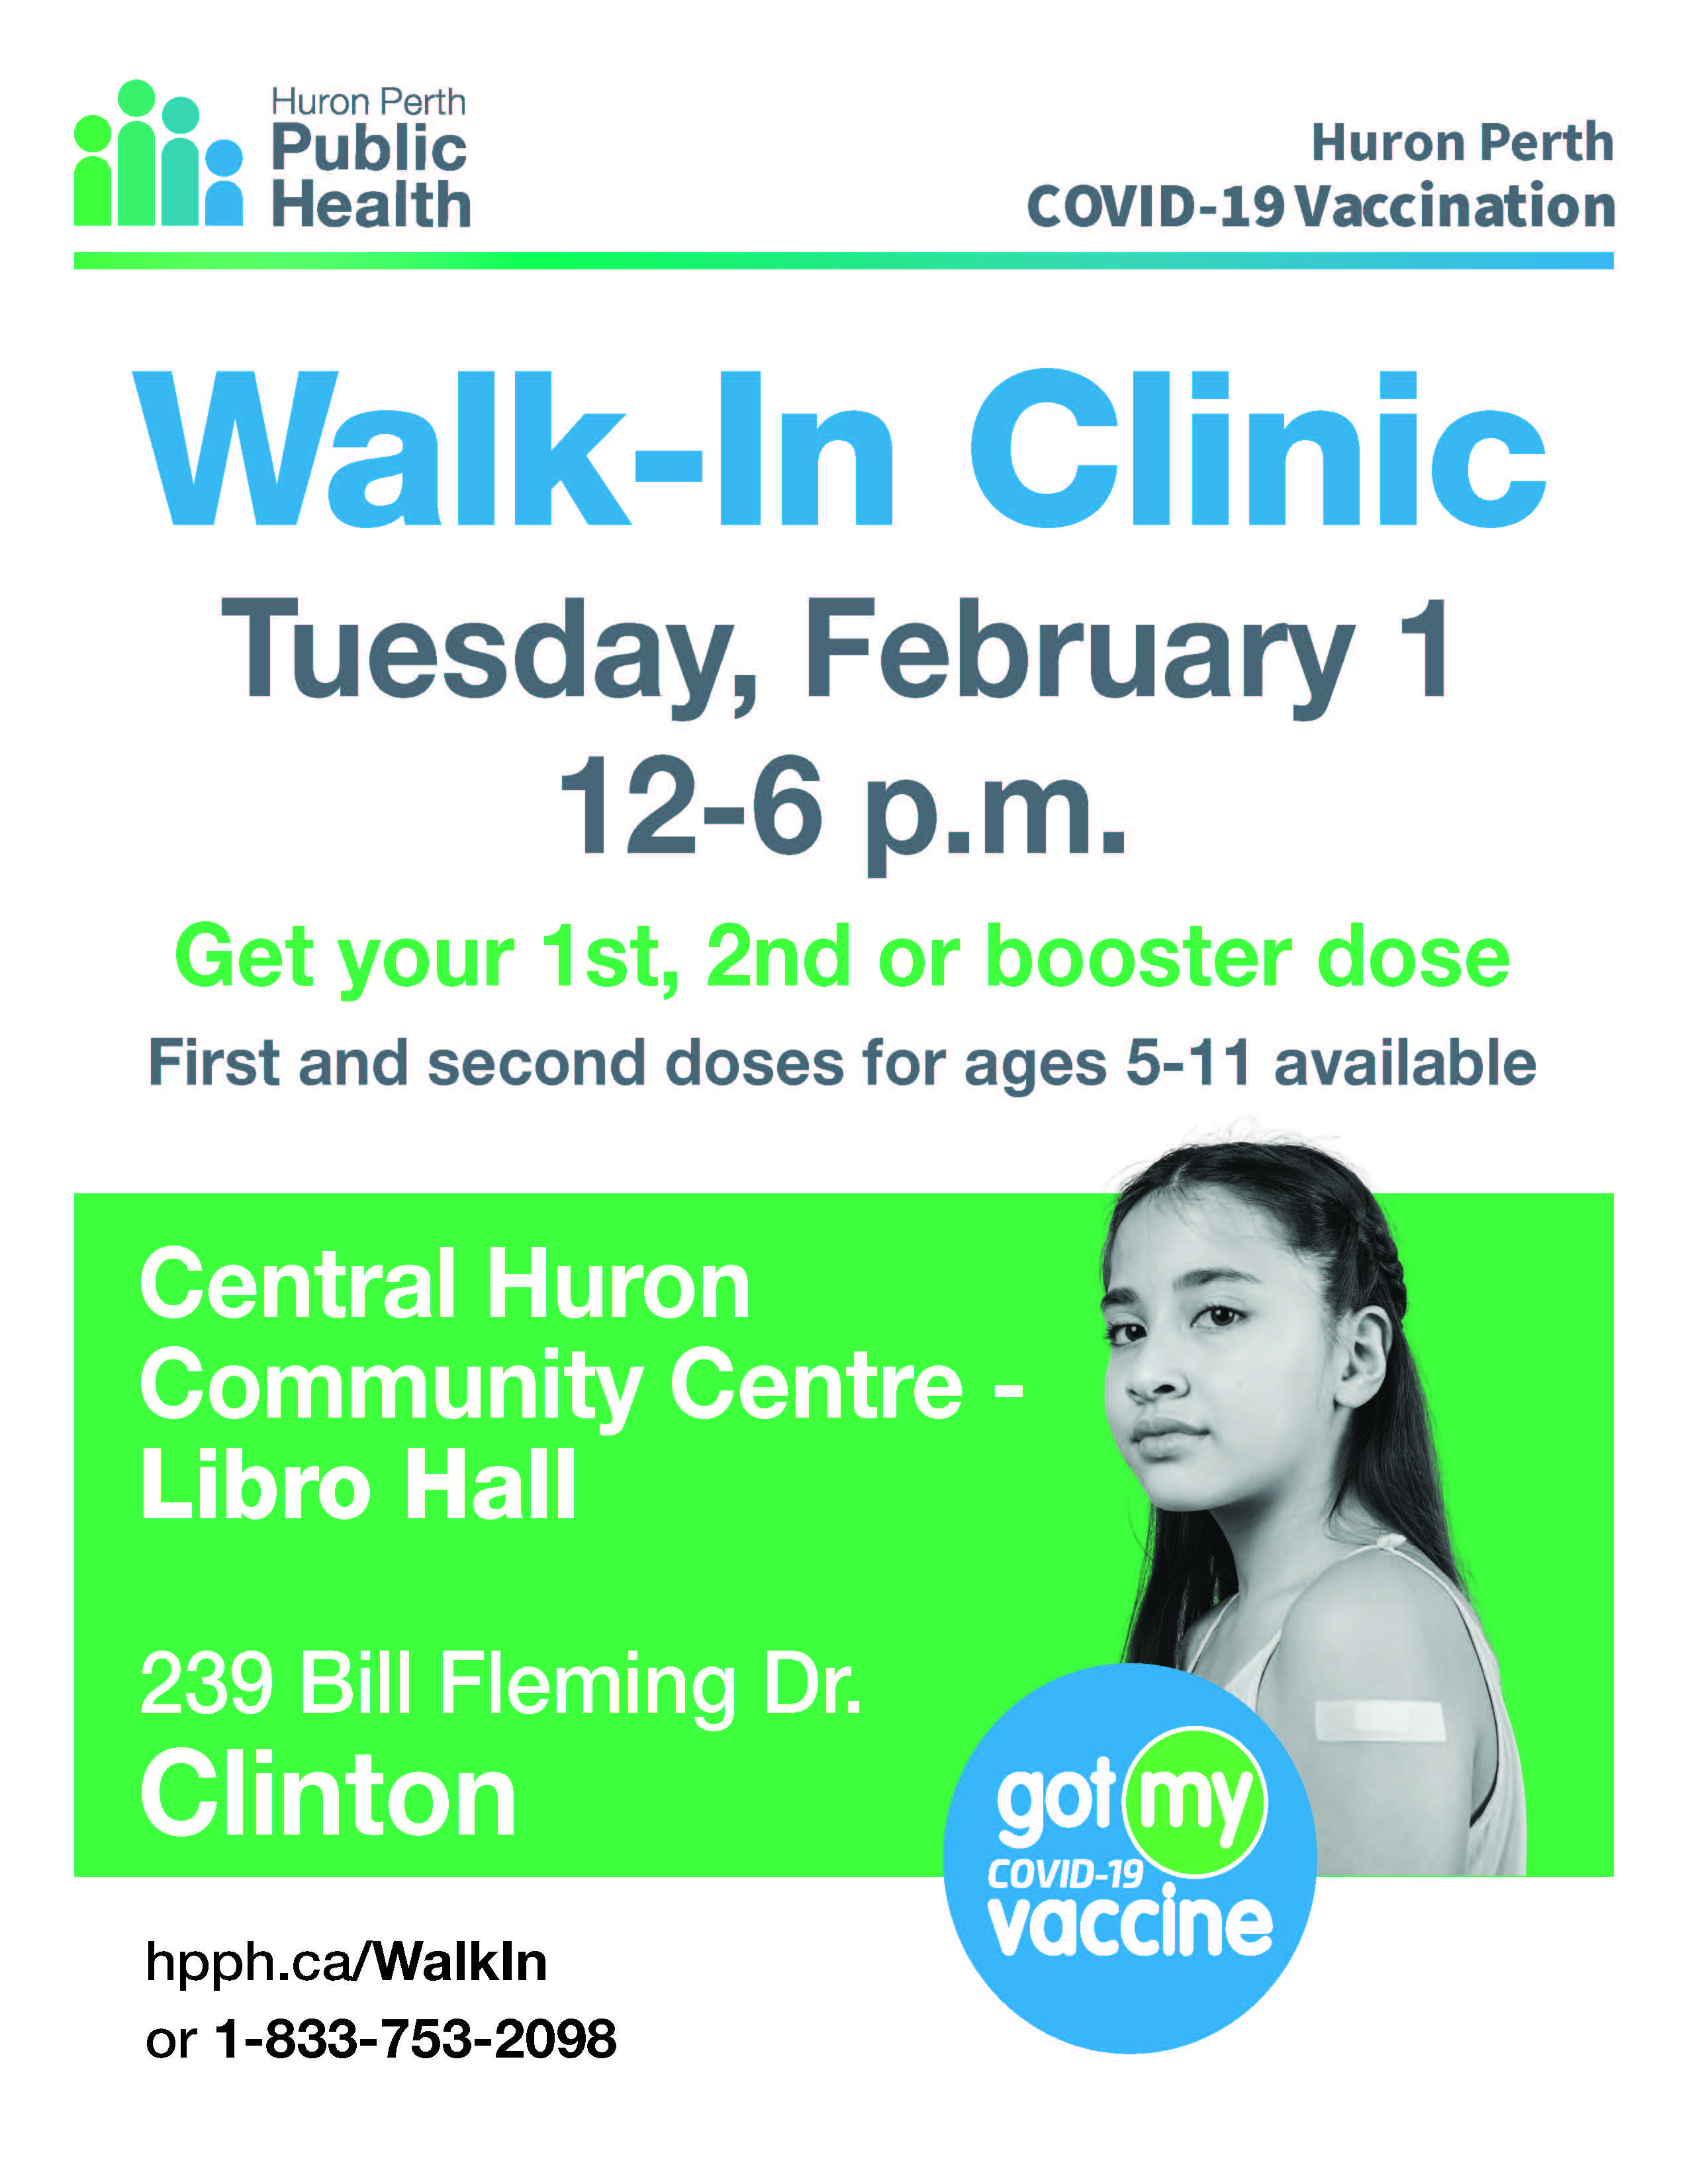 COVID-19 Vaccination Clinic on February 1, 2022 from 12-6pm, Central Huron Community Centre 